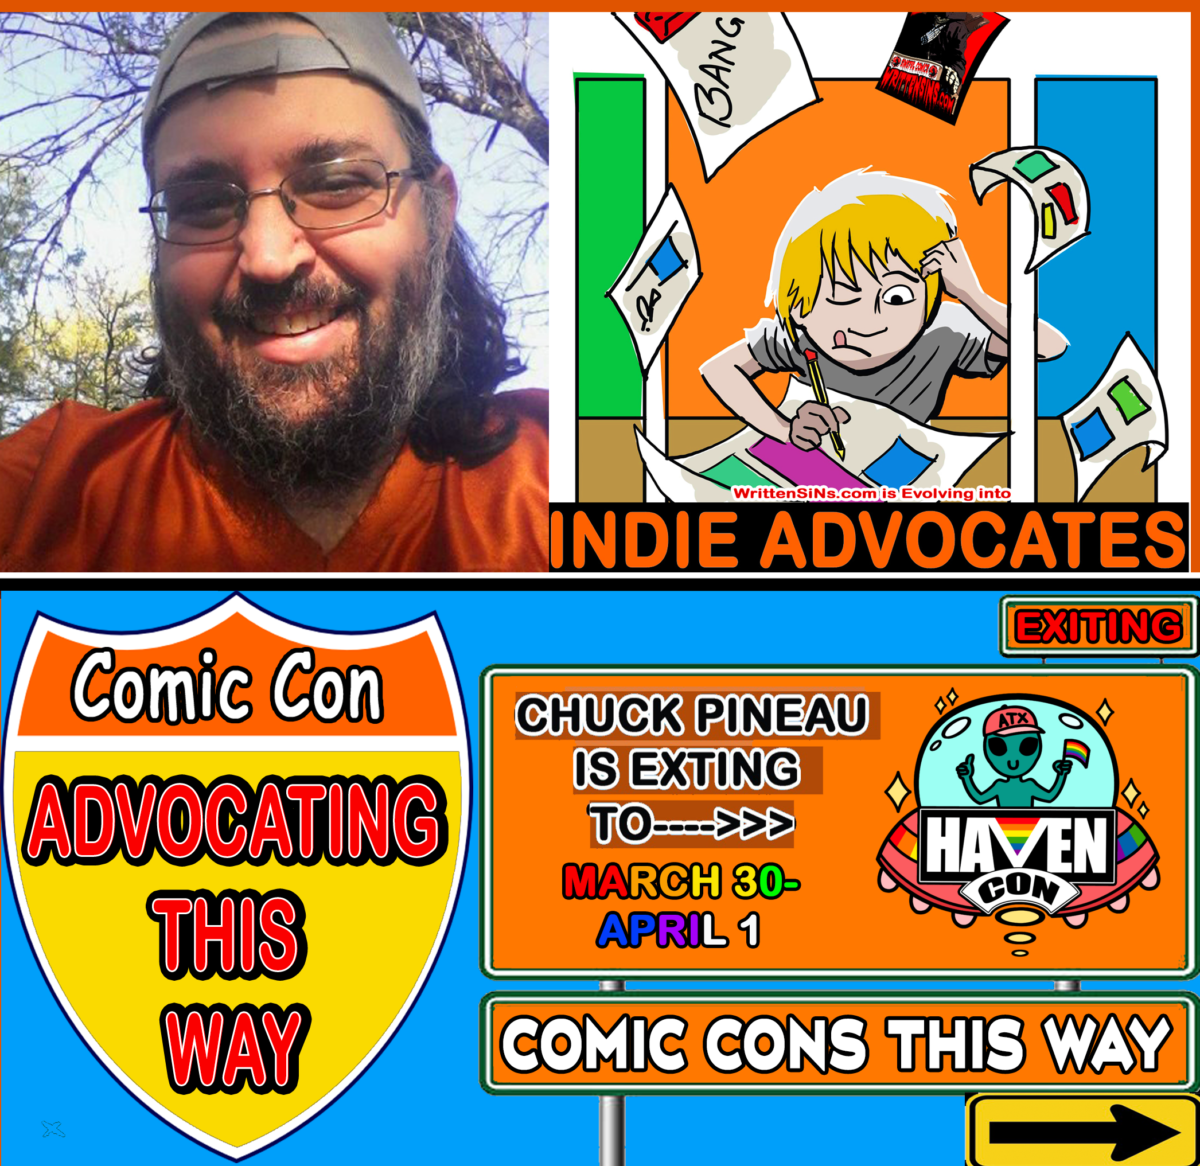 COMIC CON HIGHWAY SOUTHERN ADVOCATING EXIT::  CHUCK PINEAU goes to HavenCon 4 for INDIEADVOCATES.COM March 29th